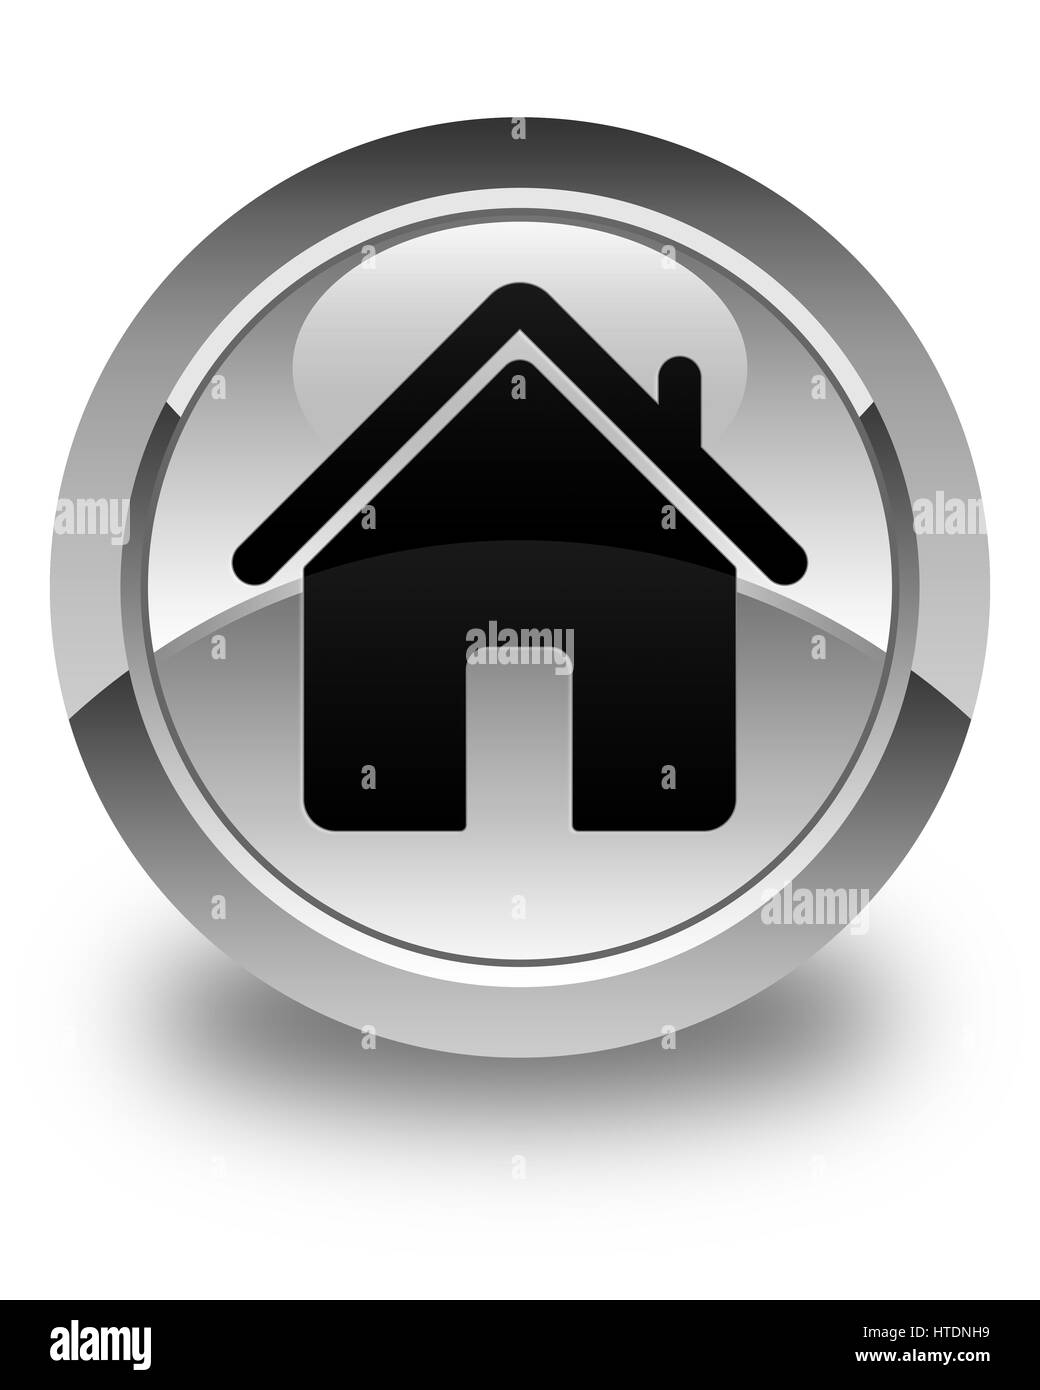 Home icon isolated on glossy white round button abstract illustration Stock Photo